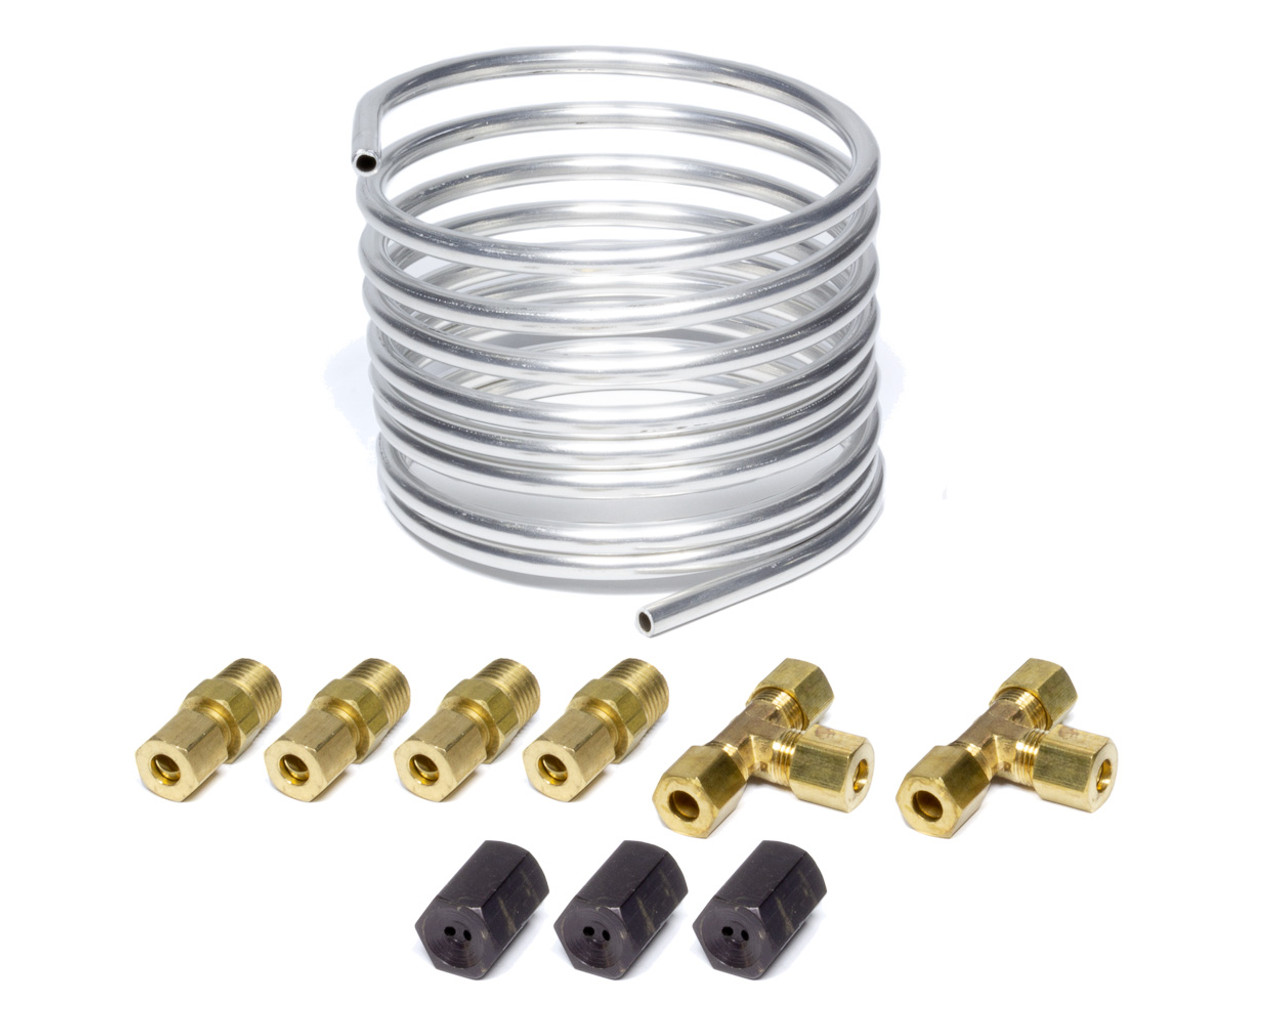 Safety Systems Tubing Kit for 10lb Systems - SAFTK10